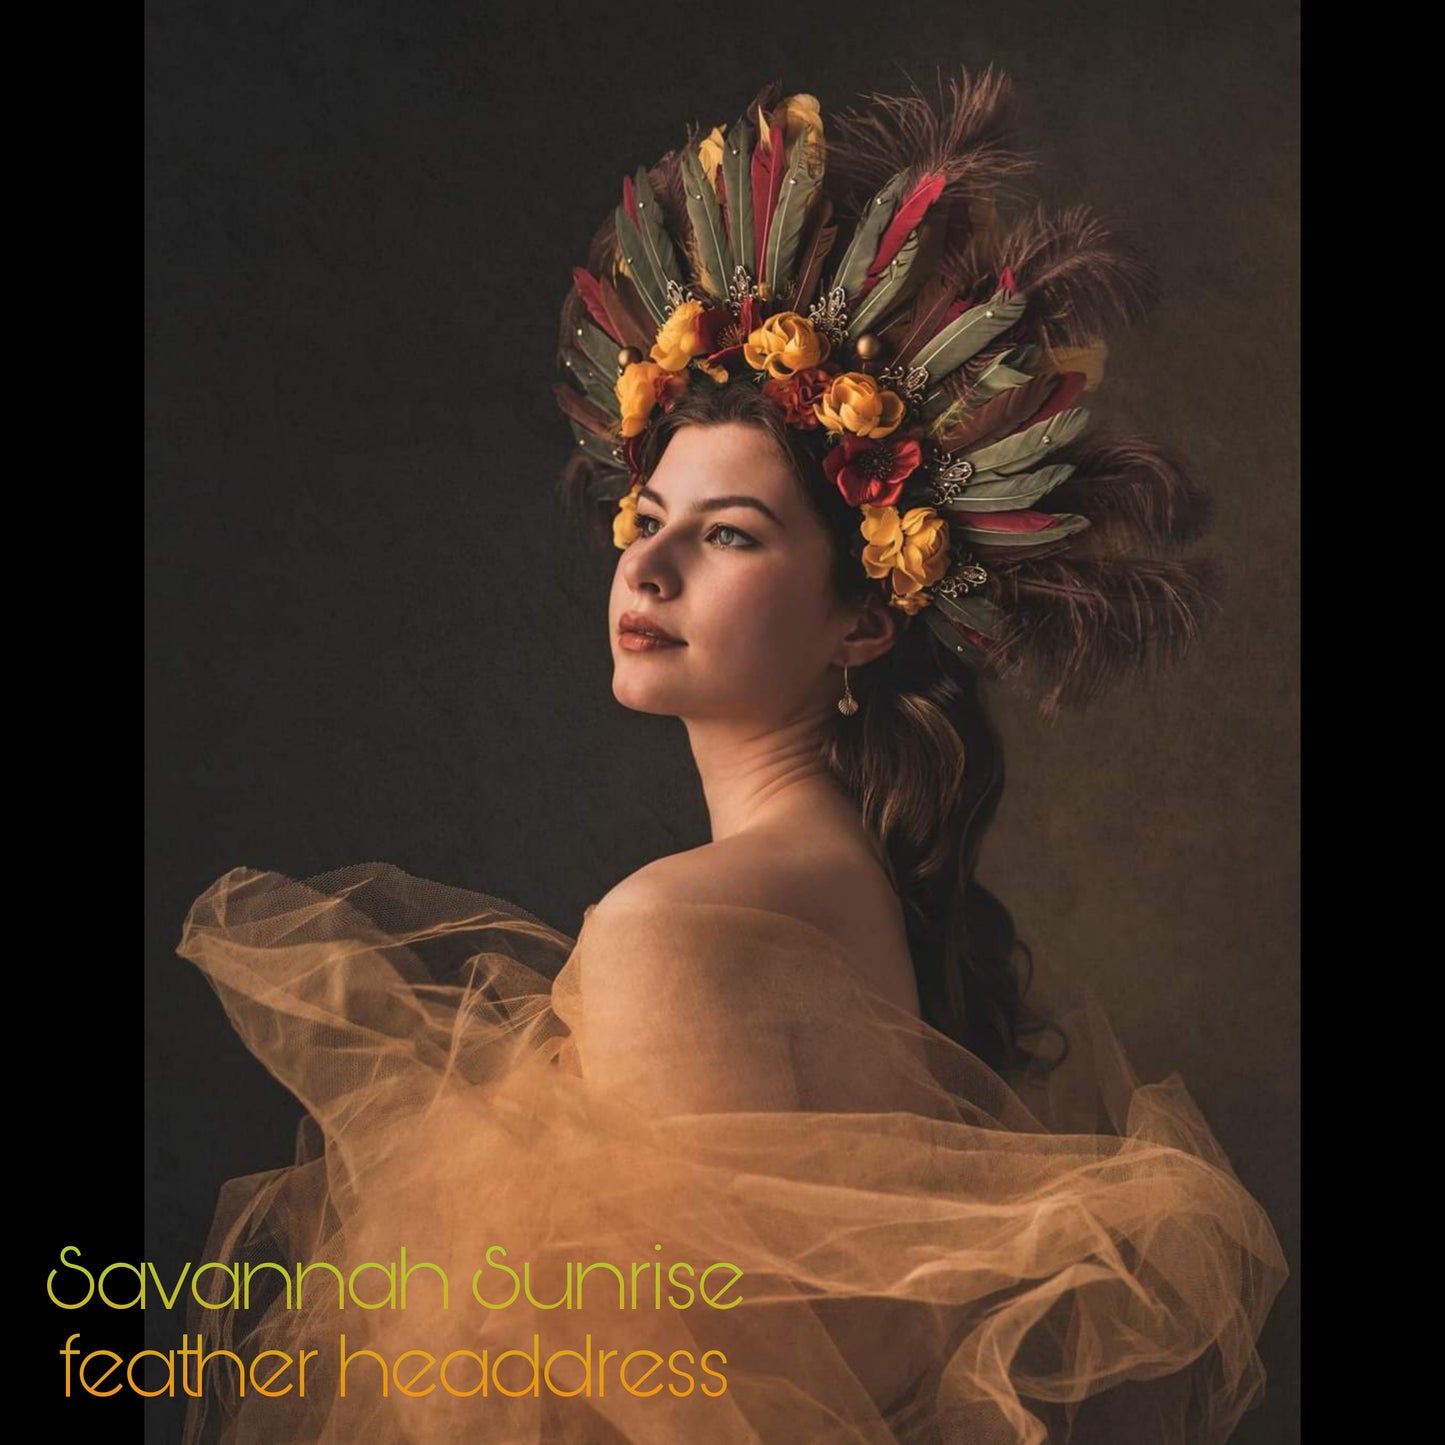 Bespoke order: Couture headpiece (1 spot available for March - May 2024)